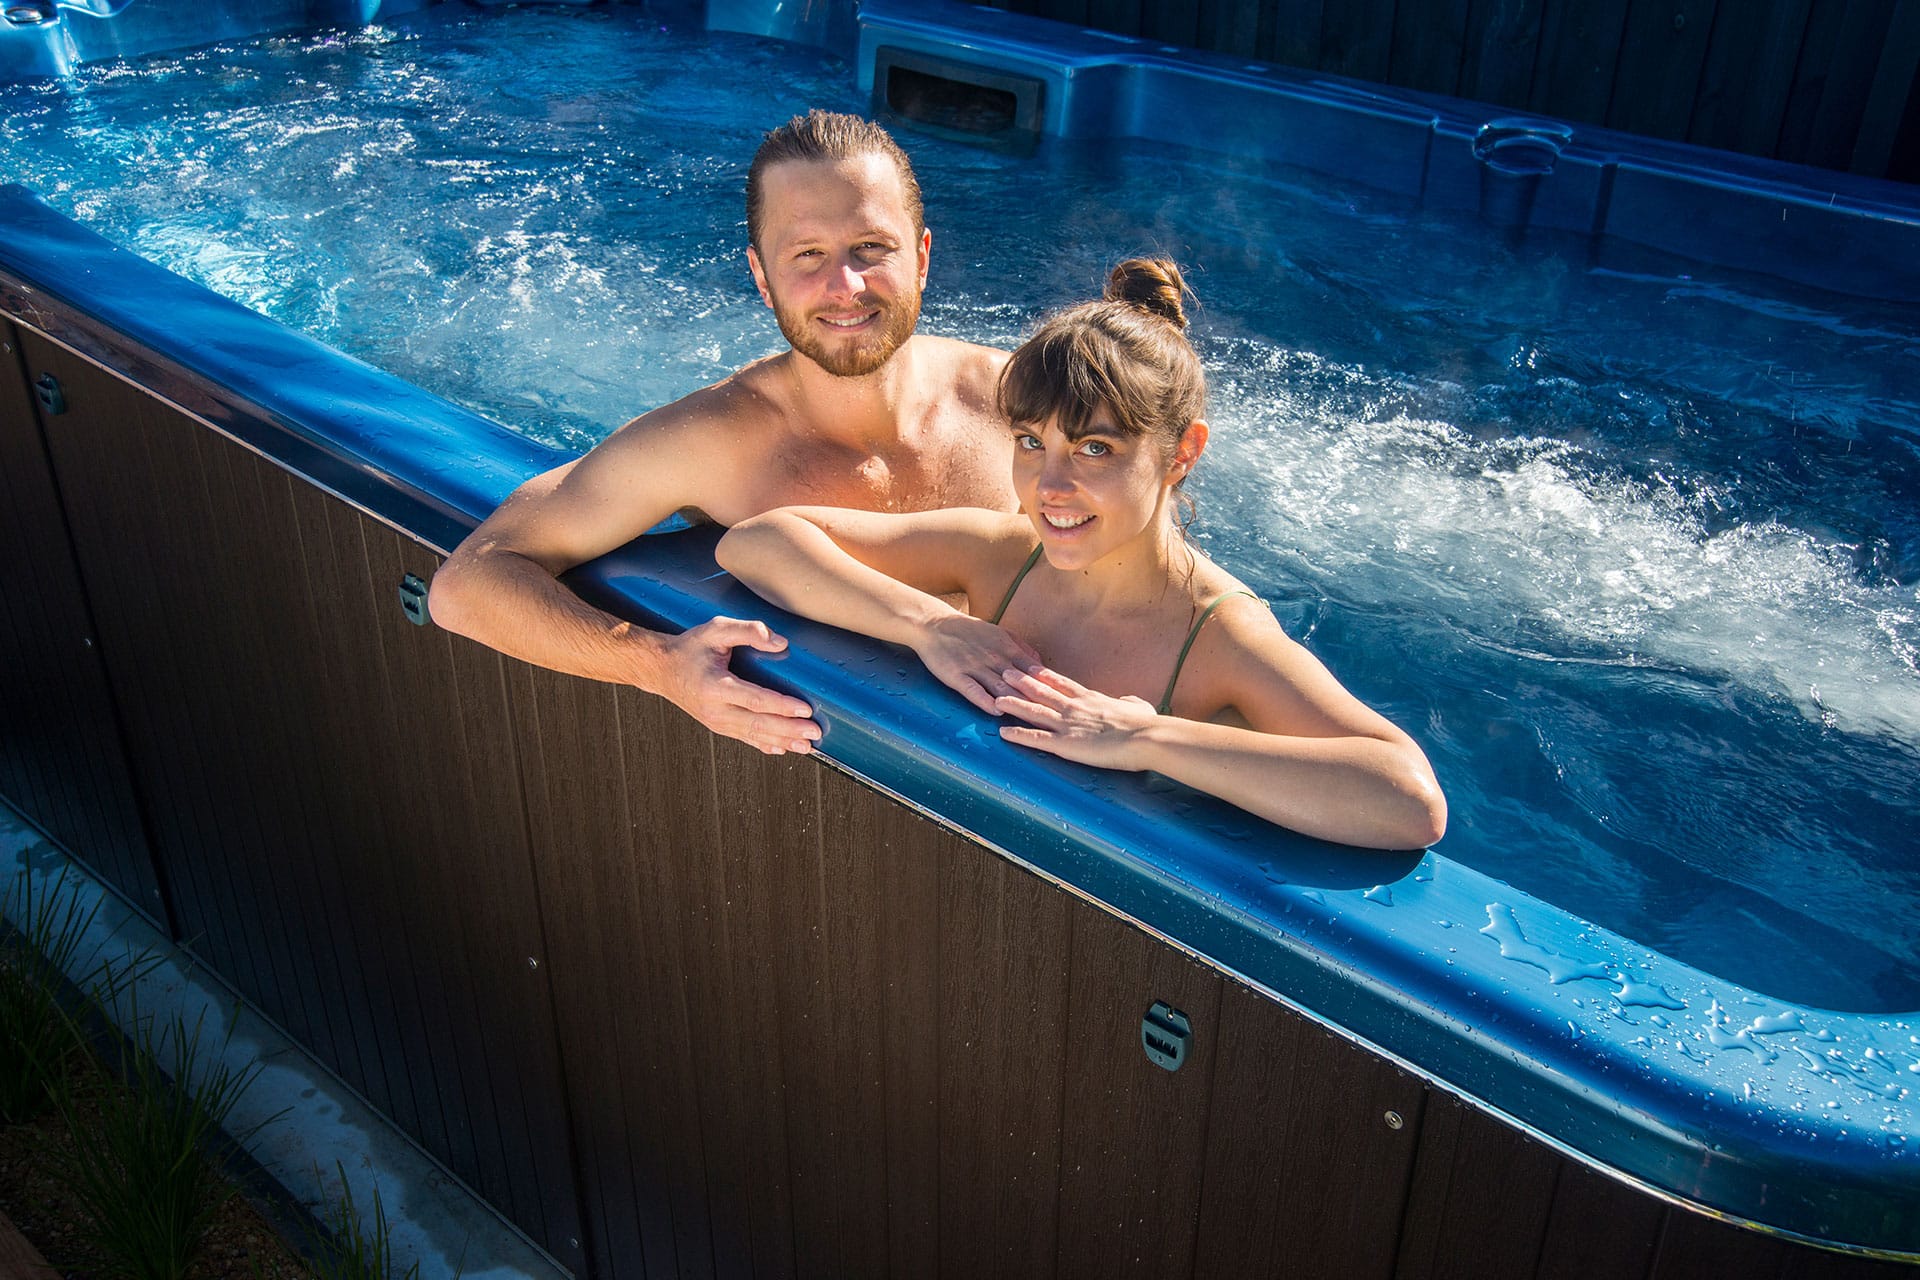 paramount-pools-and-spas-in-waikato-hamilton-new-zealand-services-design-supply-contruction-and-accessories-Sapphire-spas-gallery-17